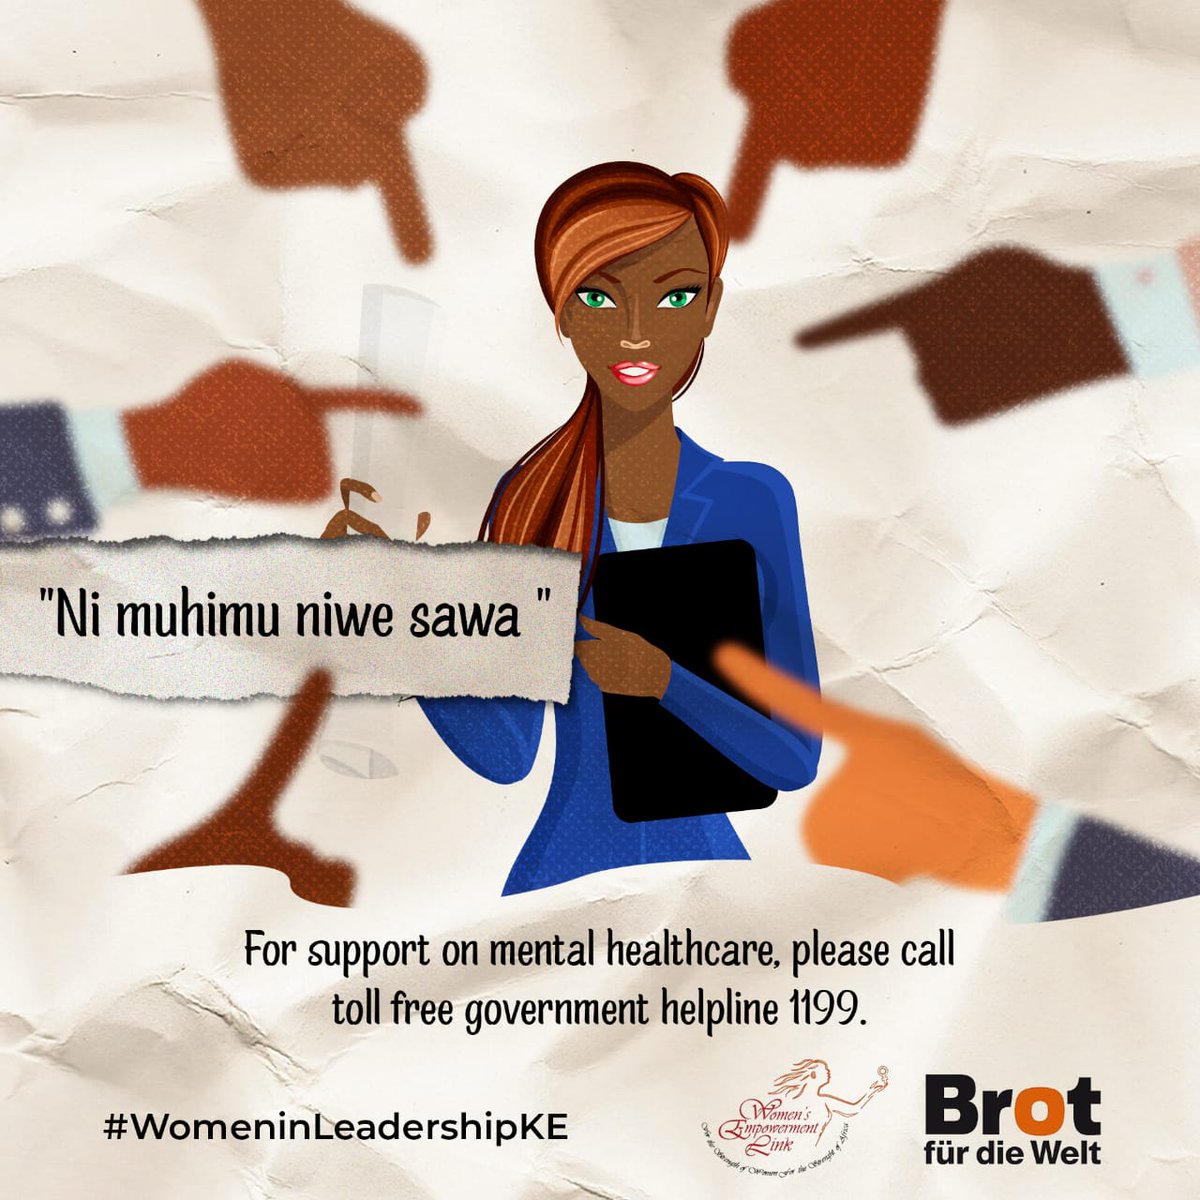 There is a lot of societal pressure that impacts the mental wellbeing of women leaders. 

We encourage women in leadership positions to speak out and seek social support, as we advocate for better mental healthcare systems, together. 

#MentalHealthKE #WomenInLeadershipKE